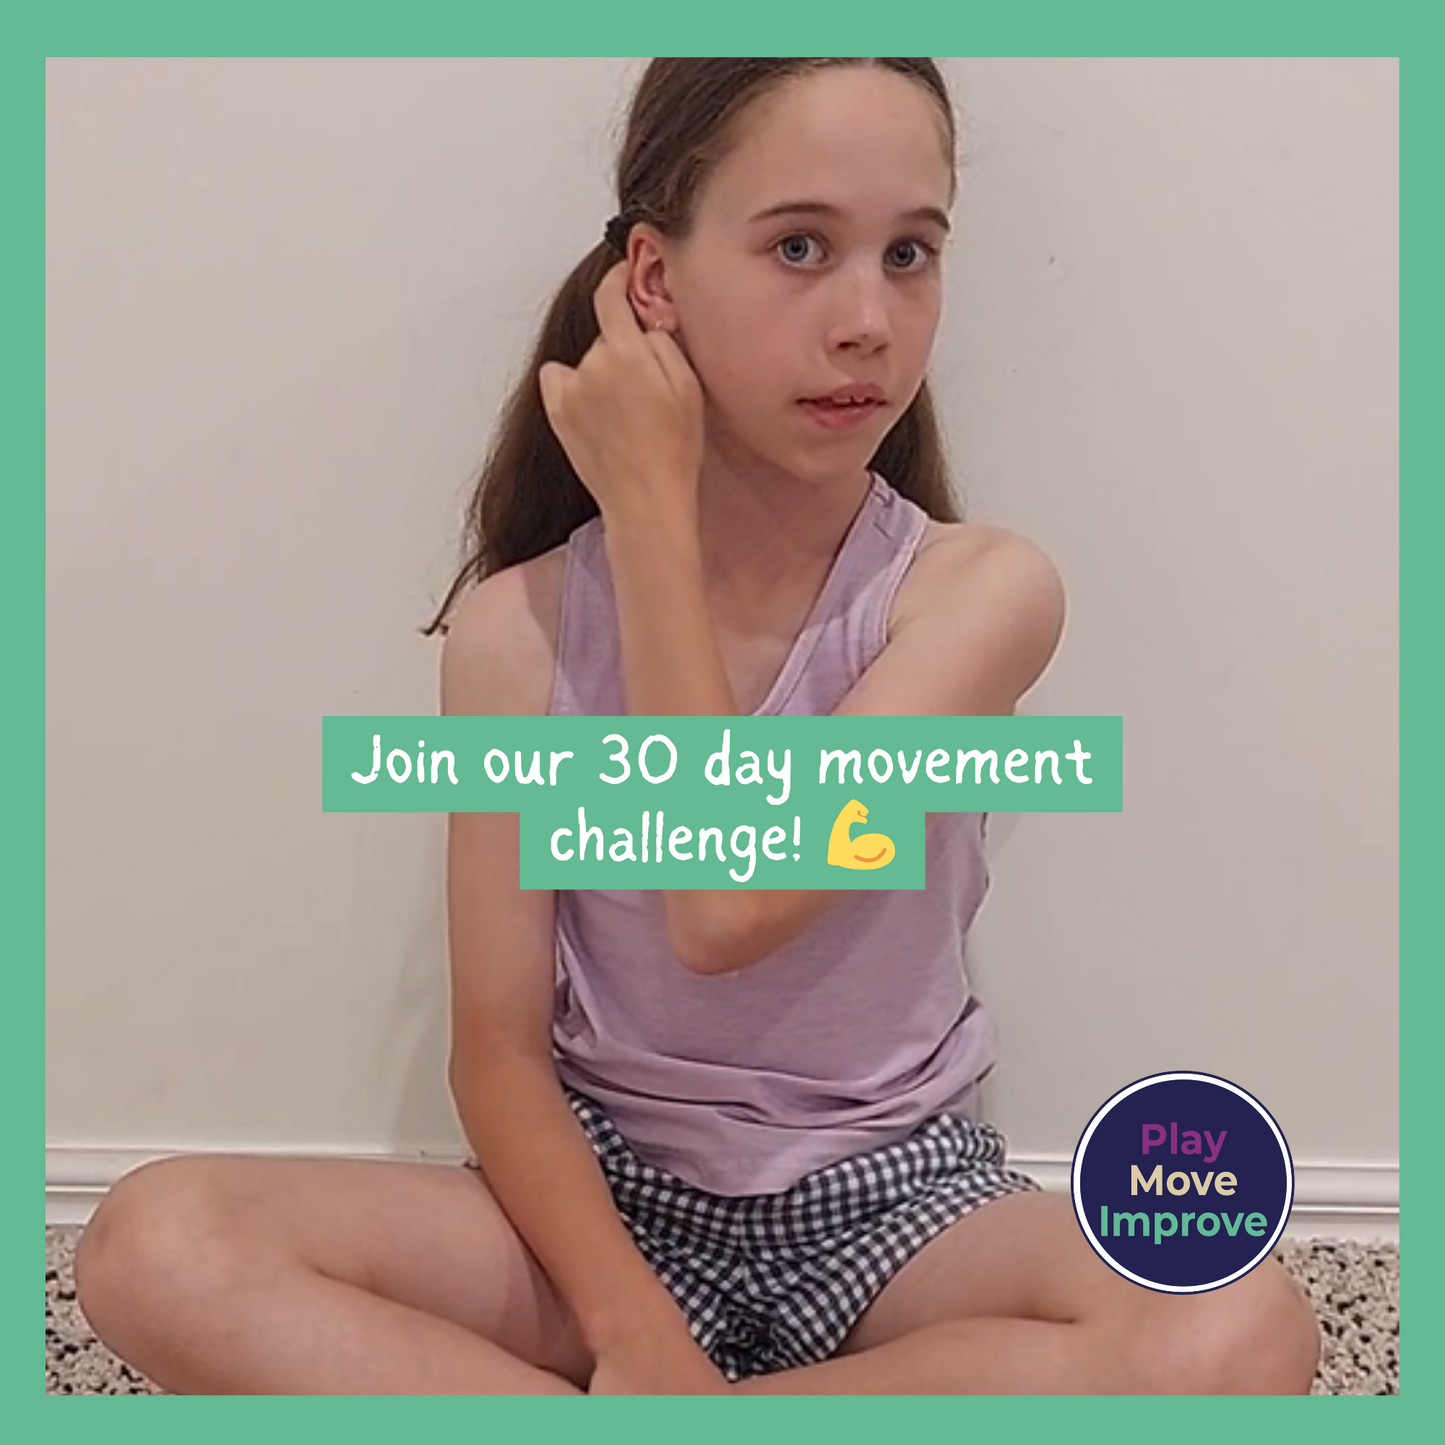 31 day kids movement challenge - Only 4 minutes per day